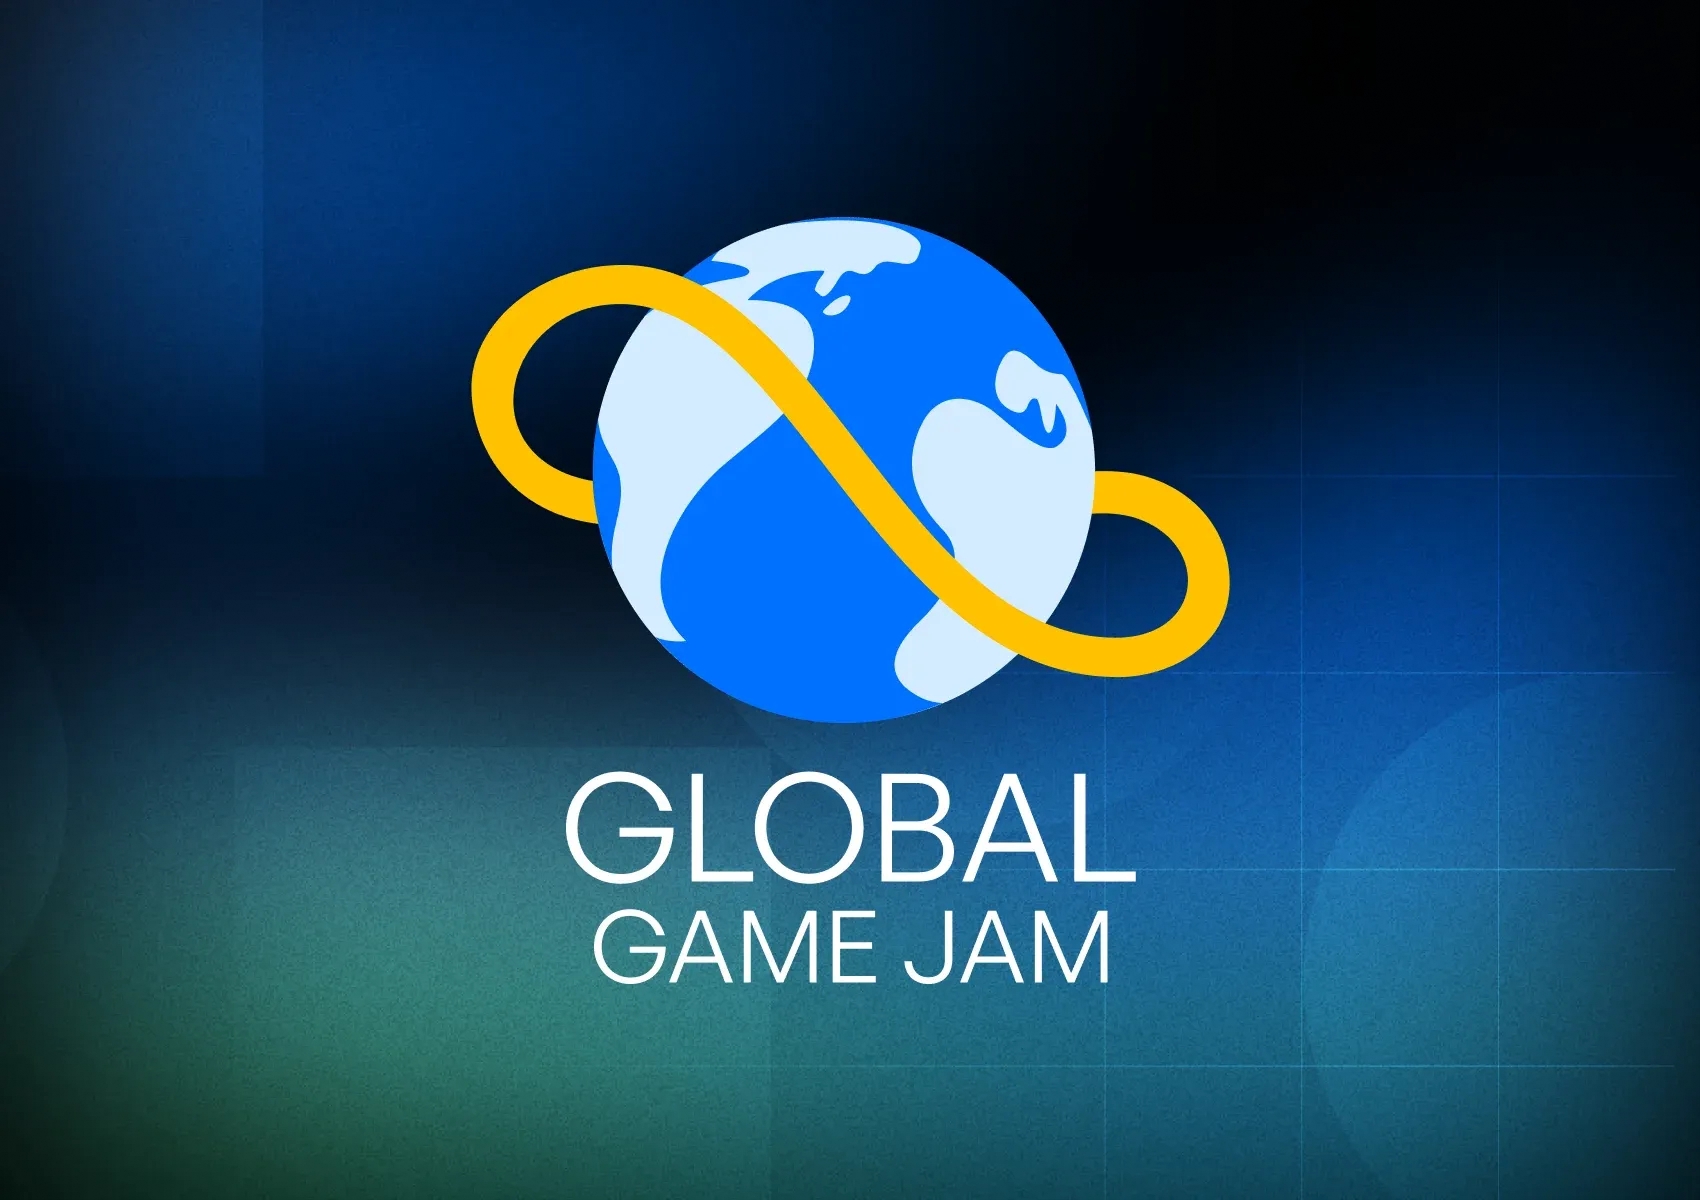 Onix’s team at the Global Game Jam